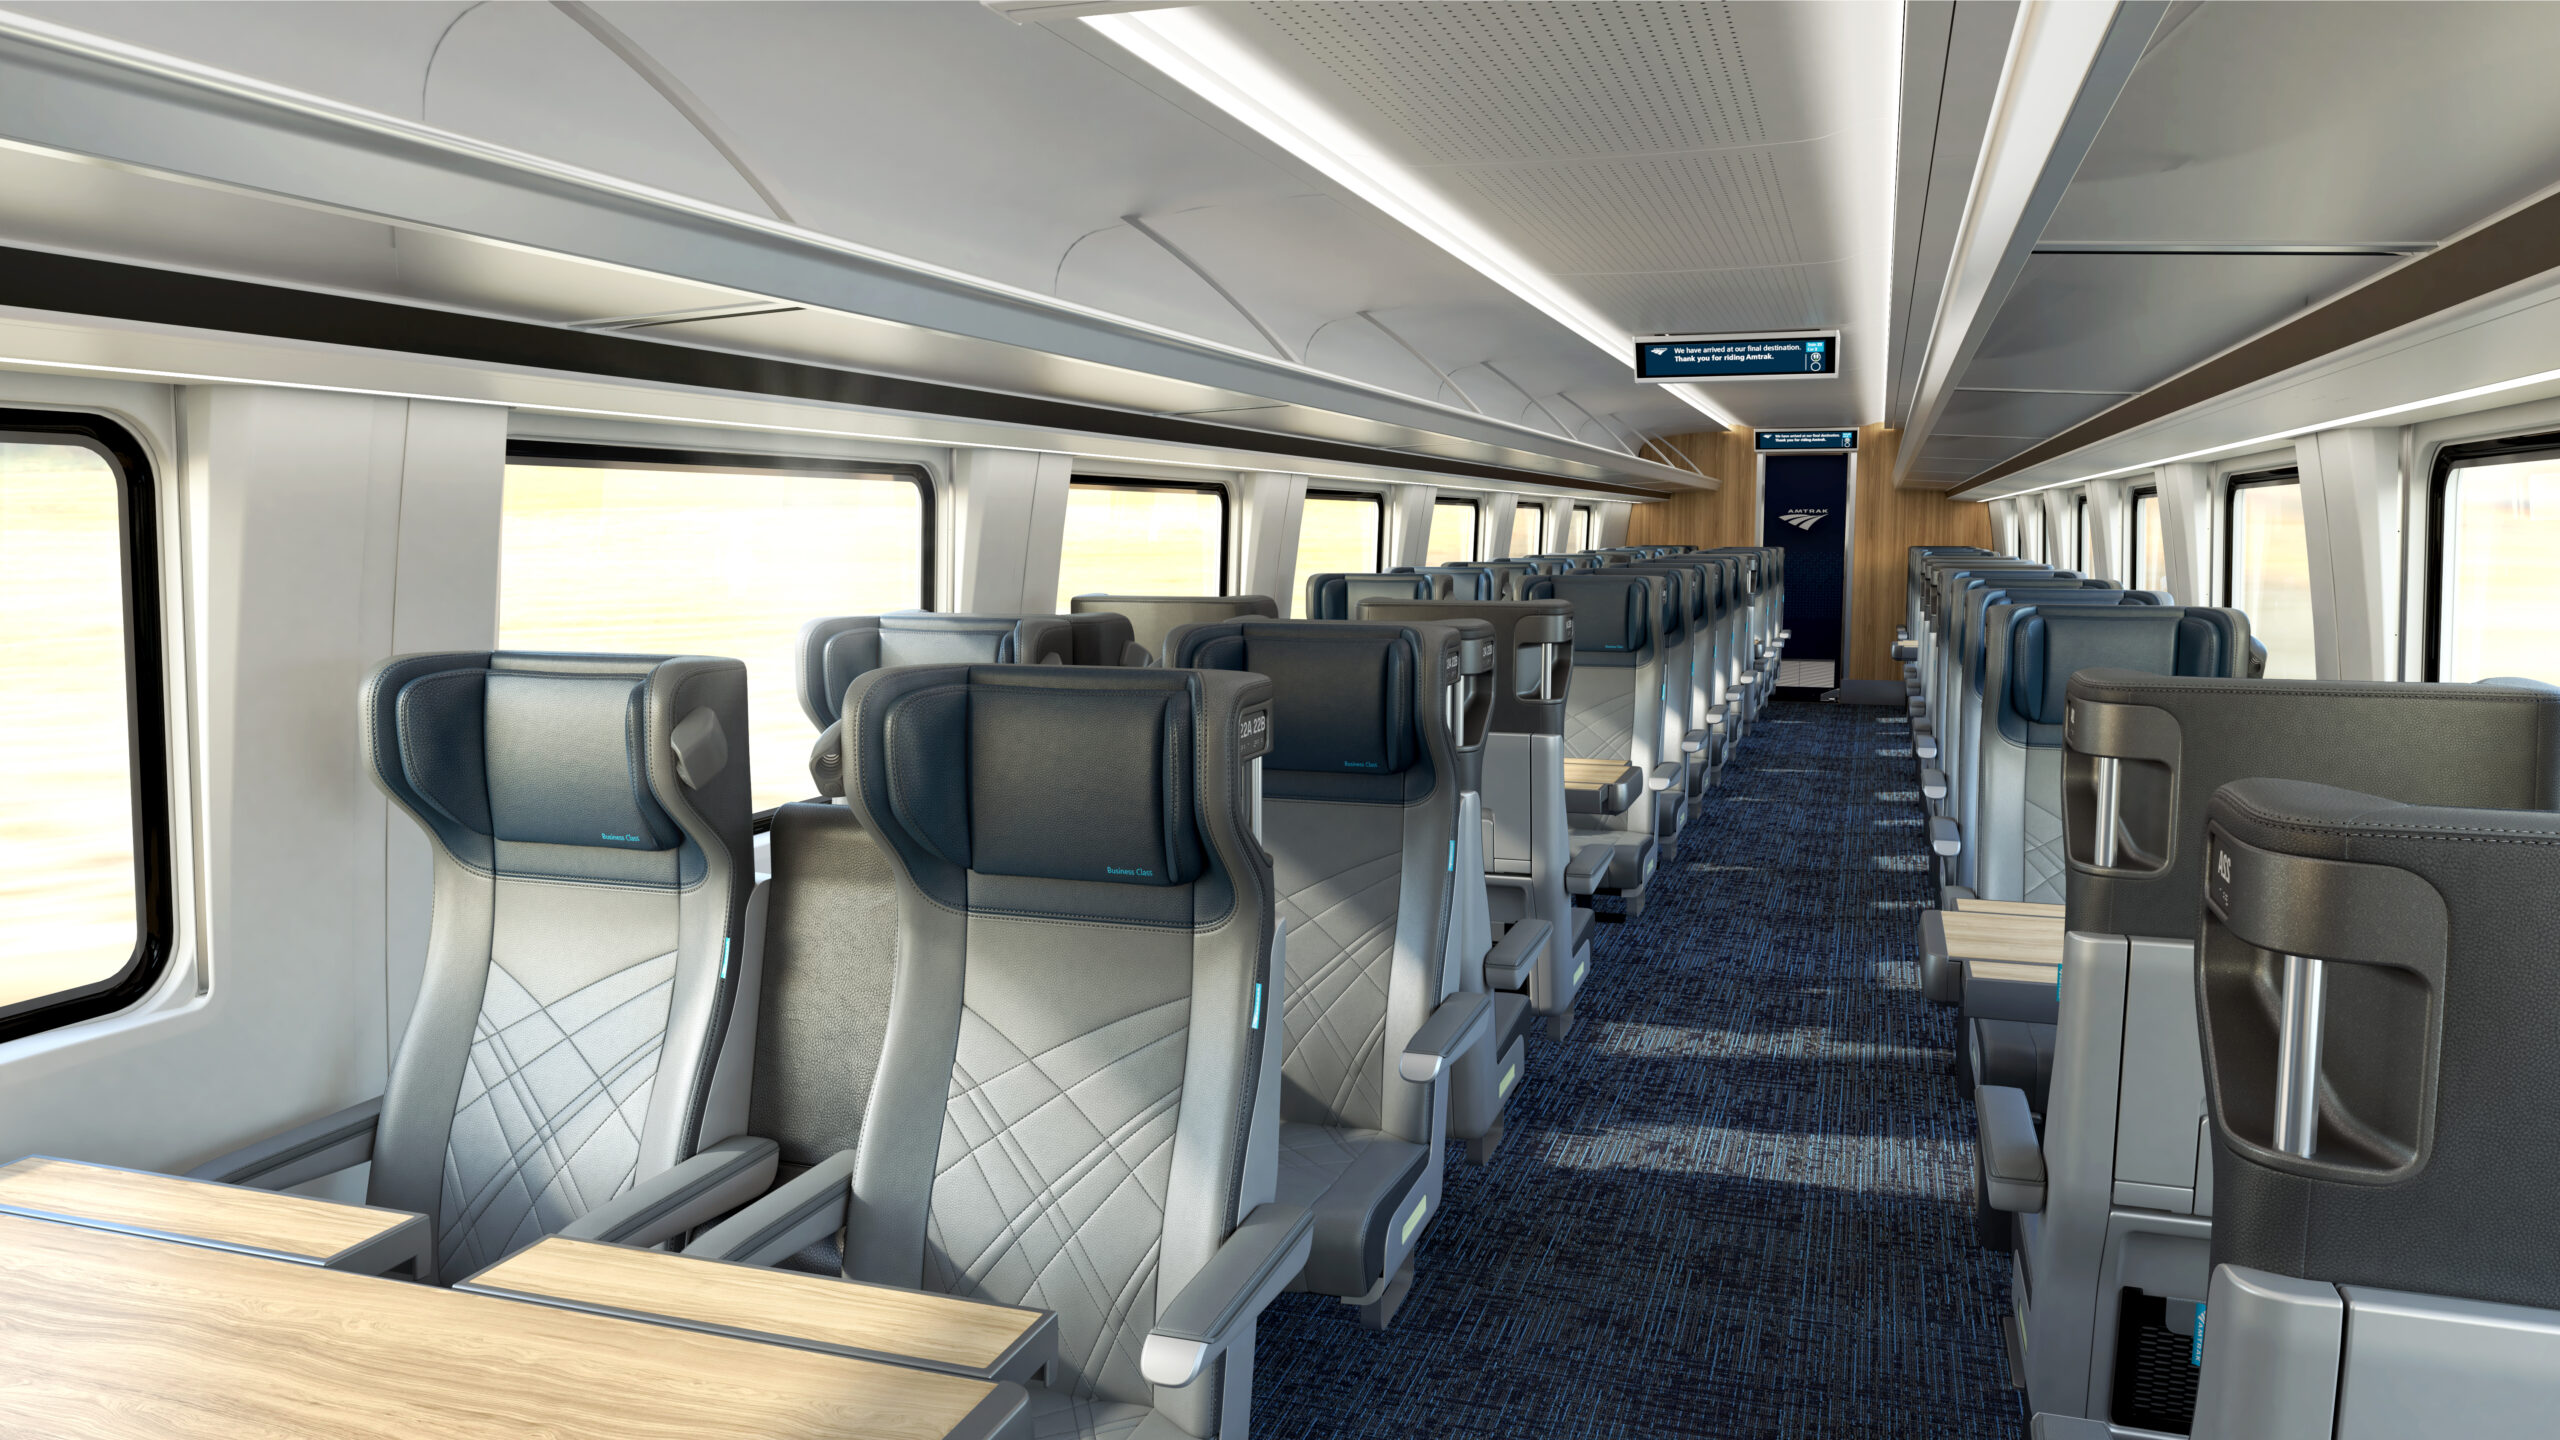 Amtrak Orders Additional Airo Trainsets To Meet Increased Demand